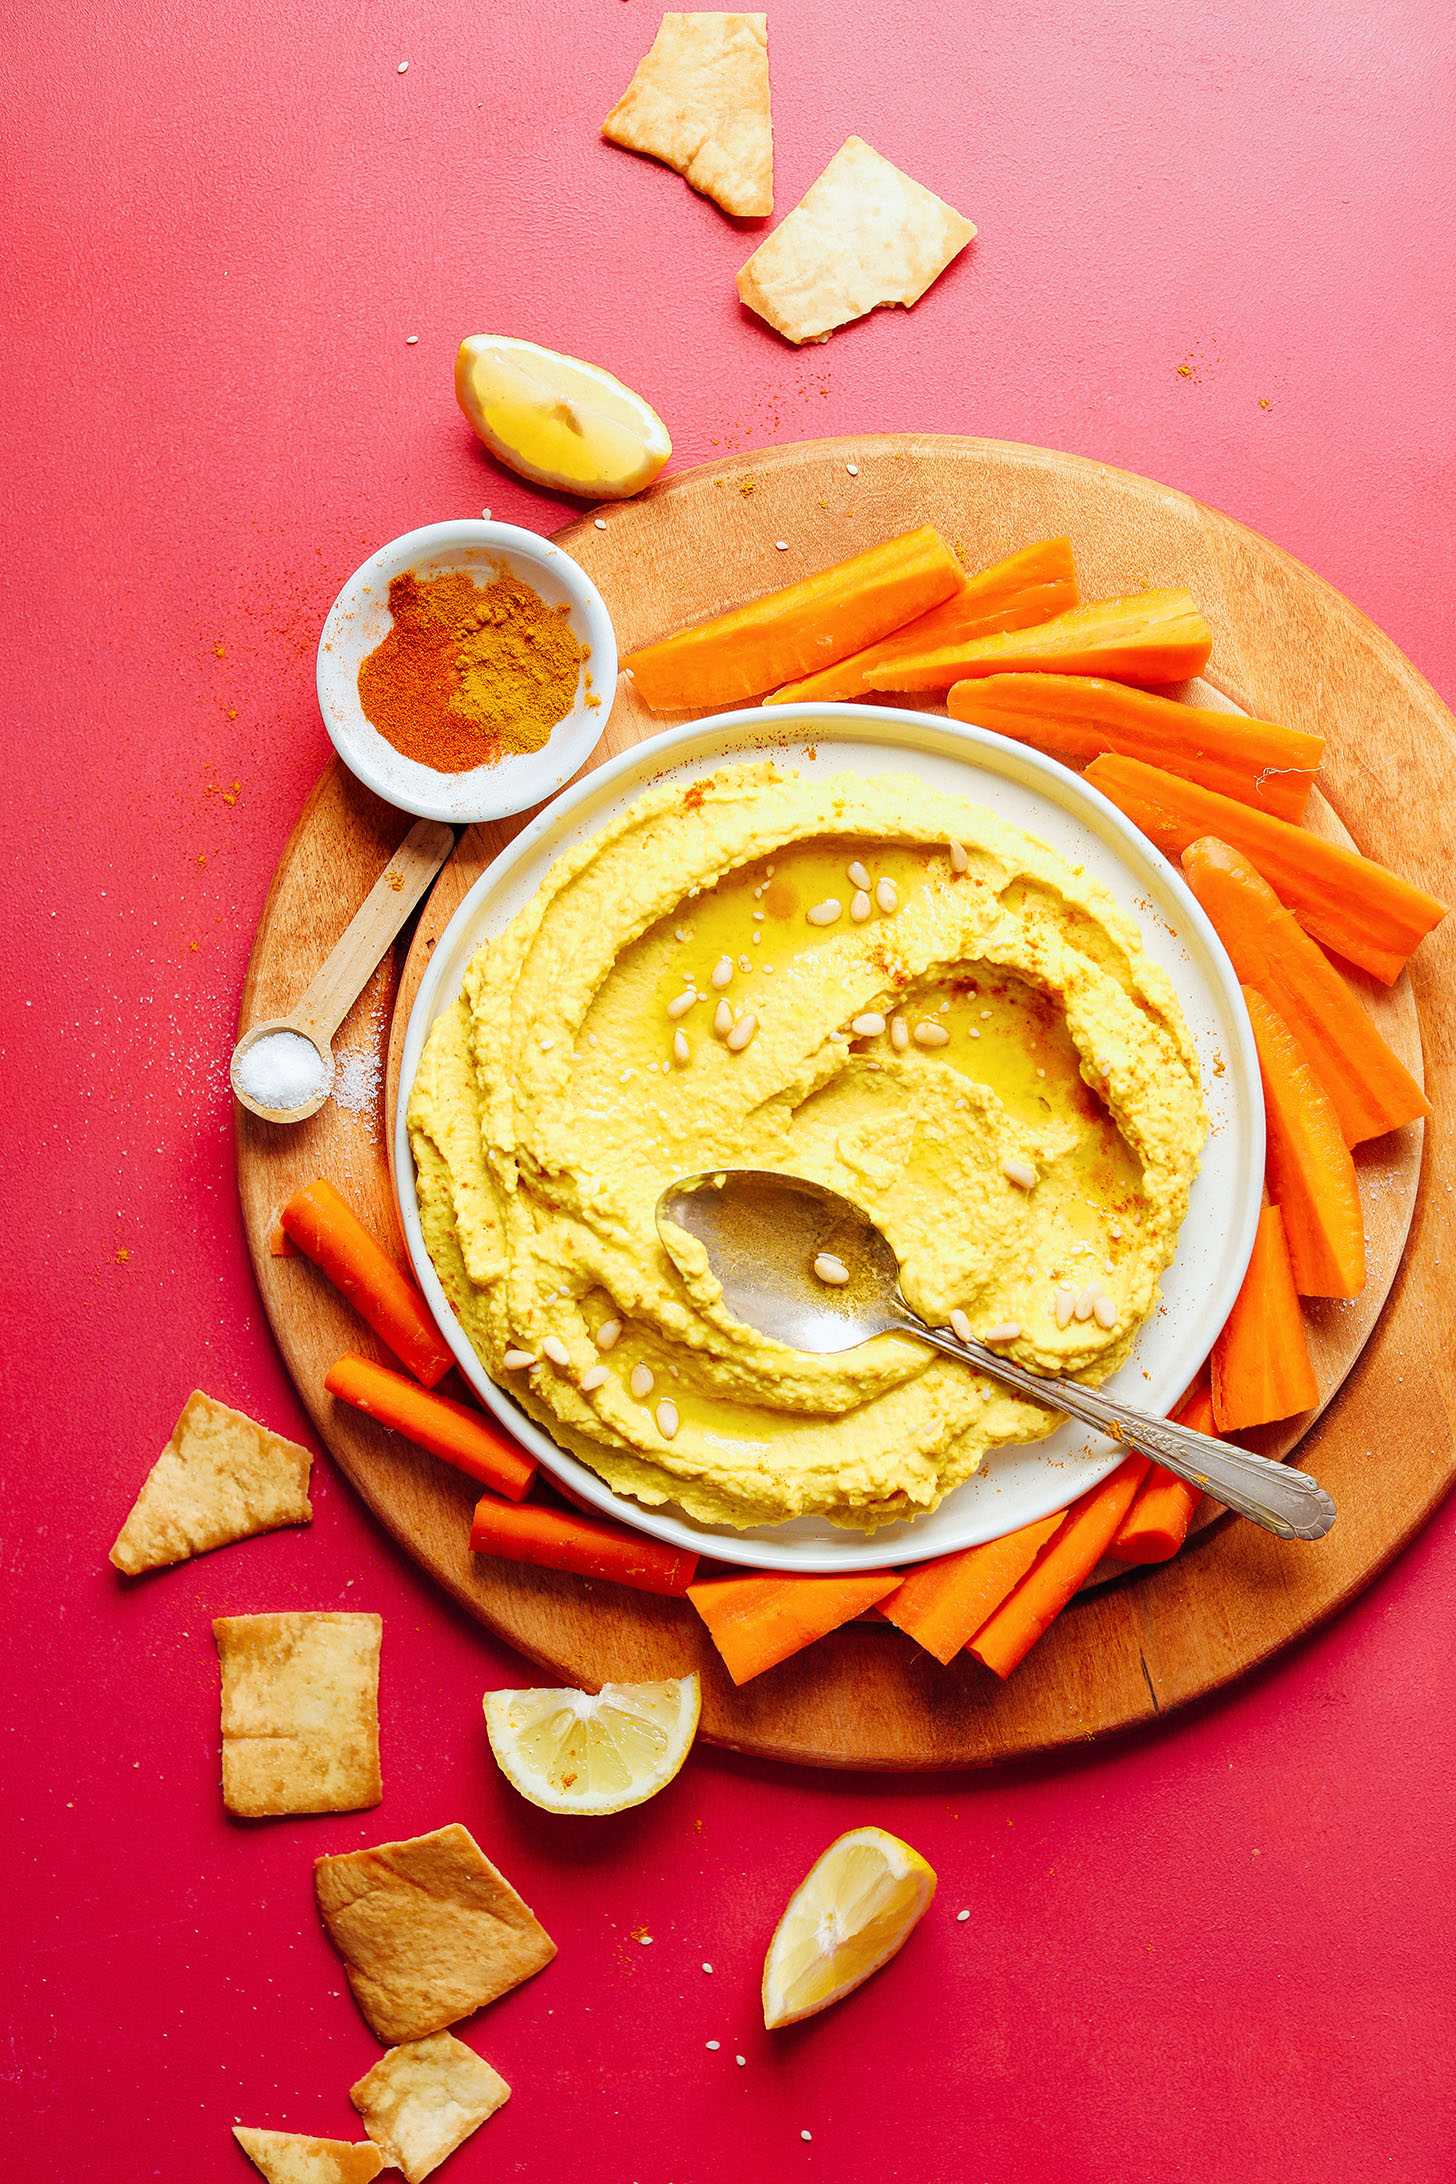 Wood cutting board featuring a bowl of our homemade hummus packed with anti-inflammatory spices and served with carrot sticks